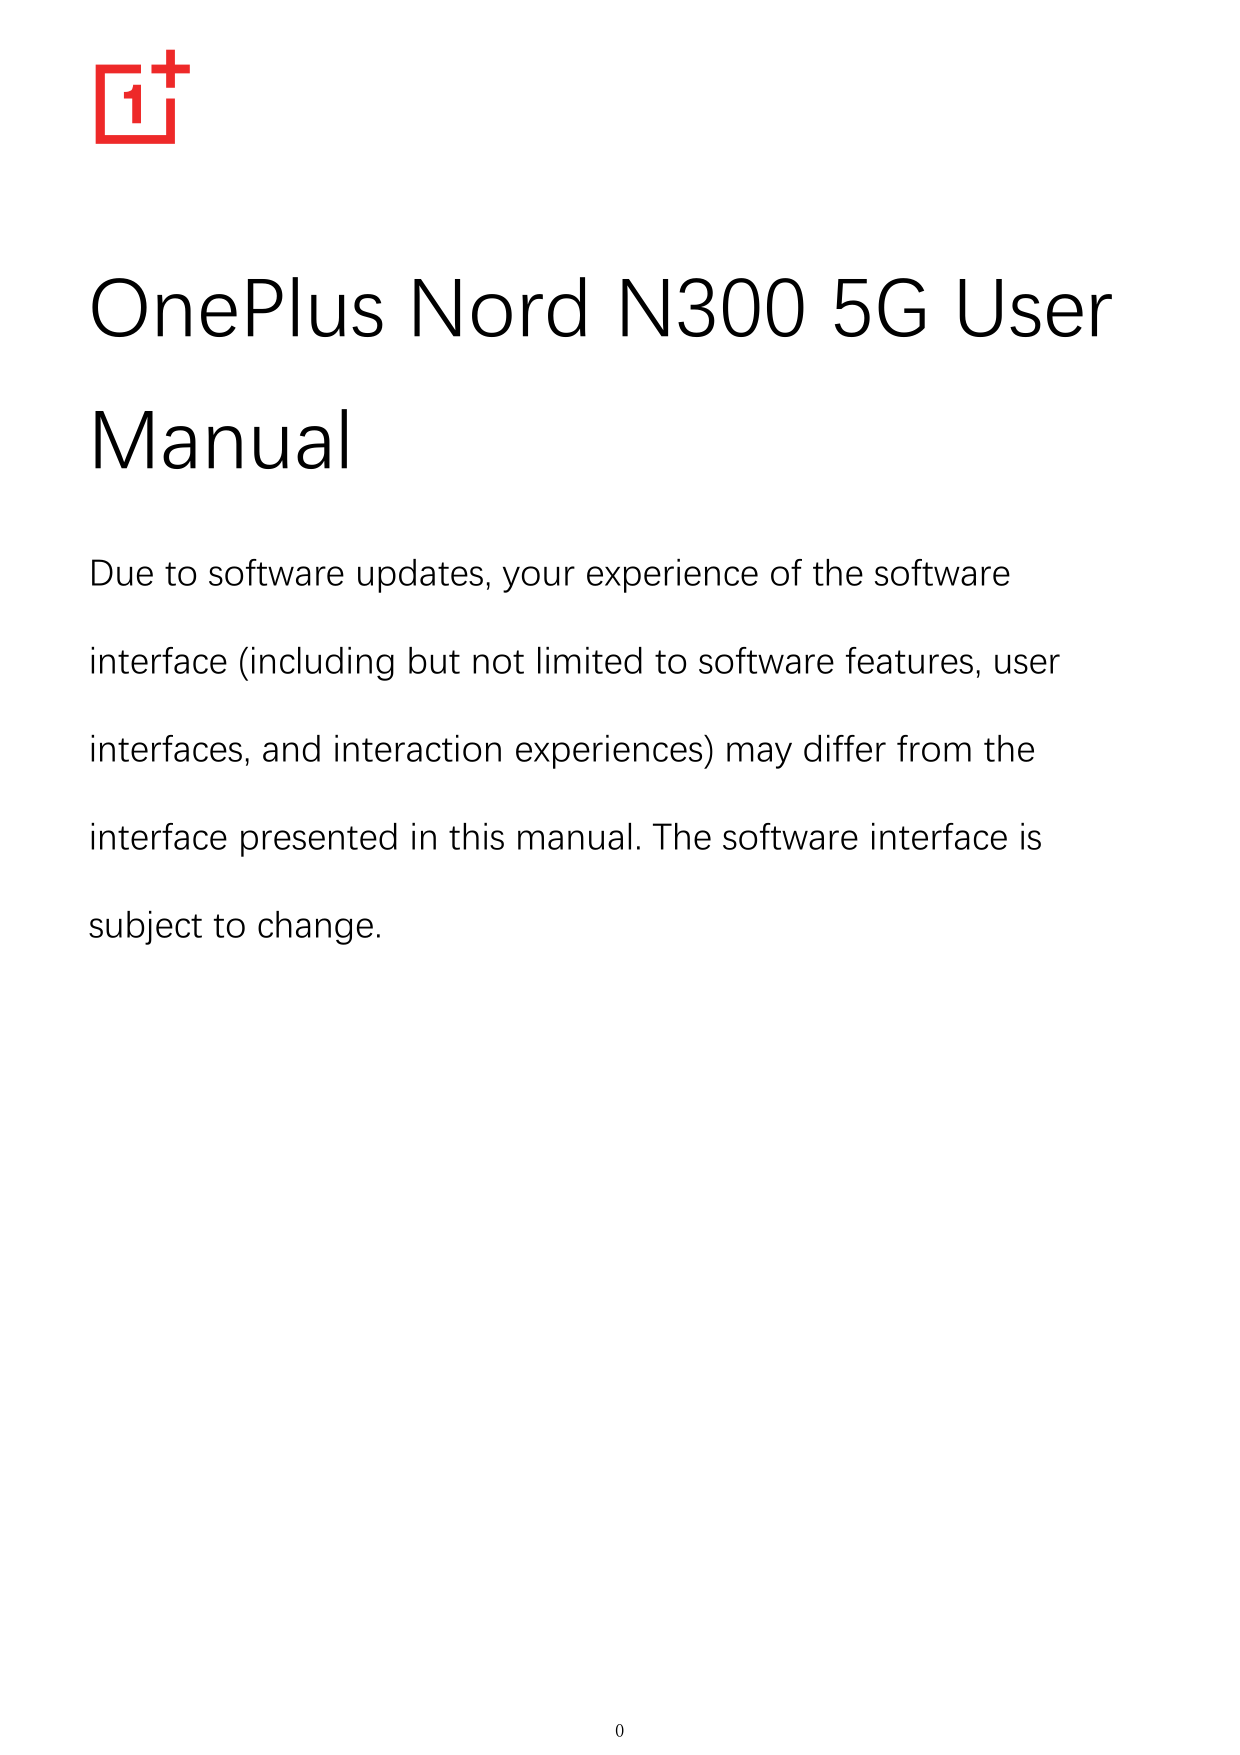 OnePlus Nord N300 5G UserManualDue to software updates, your experience of the softwareinterface (including but not limited to s